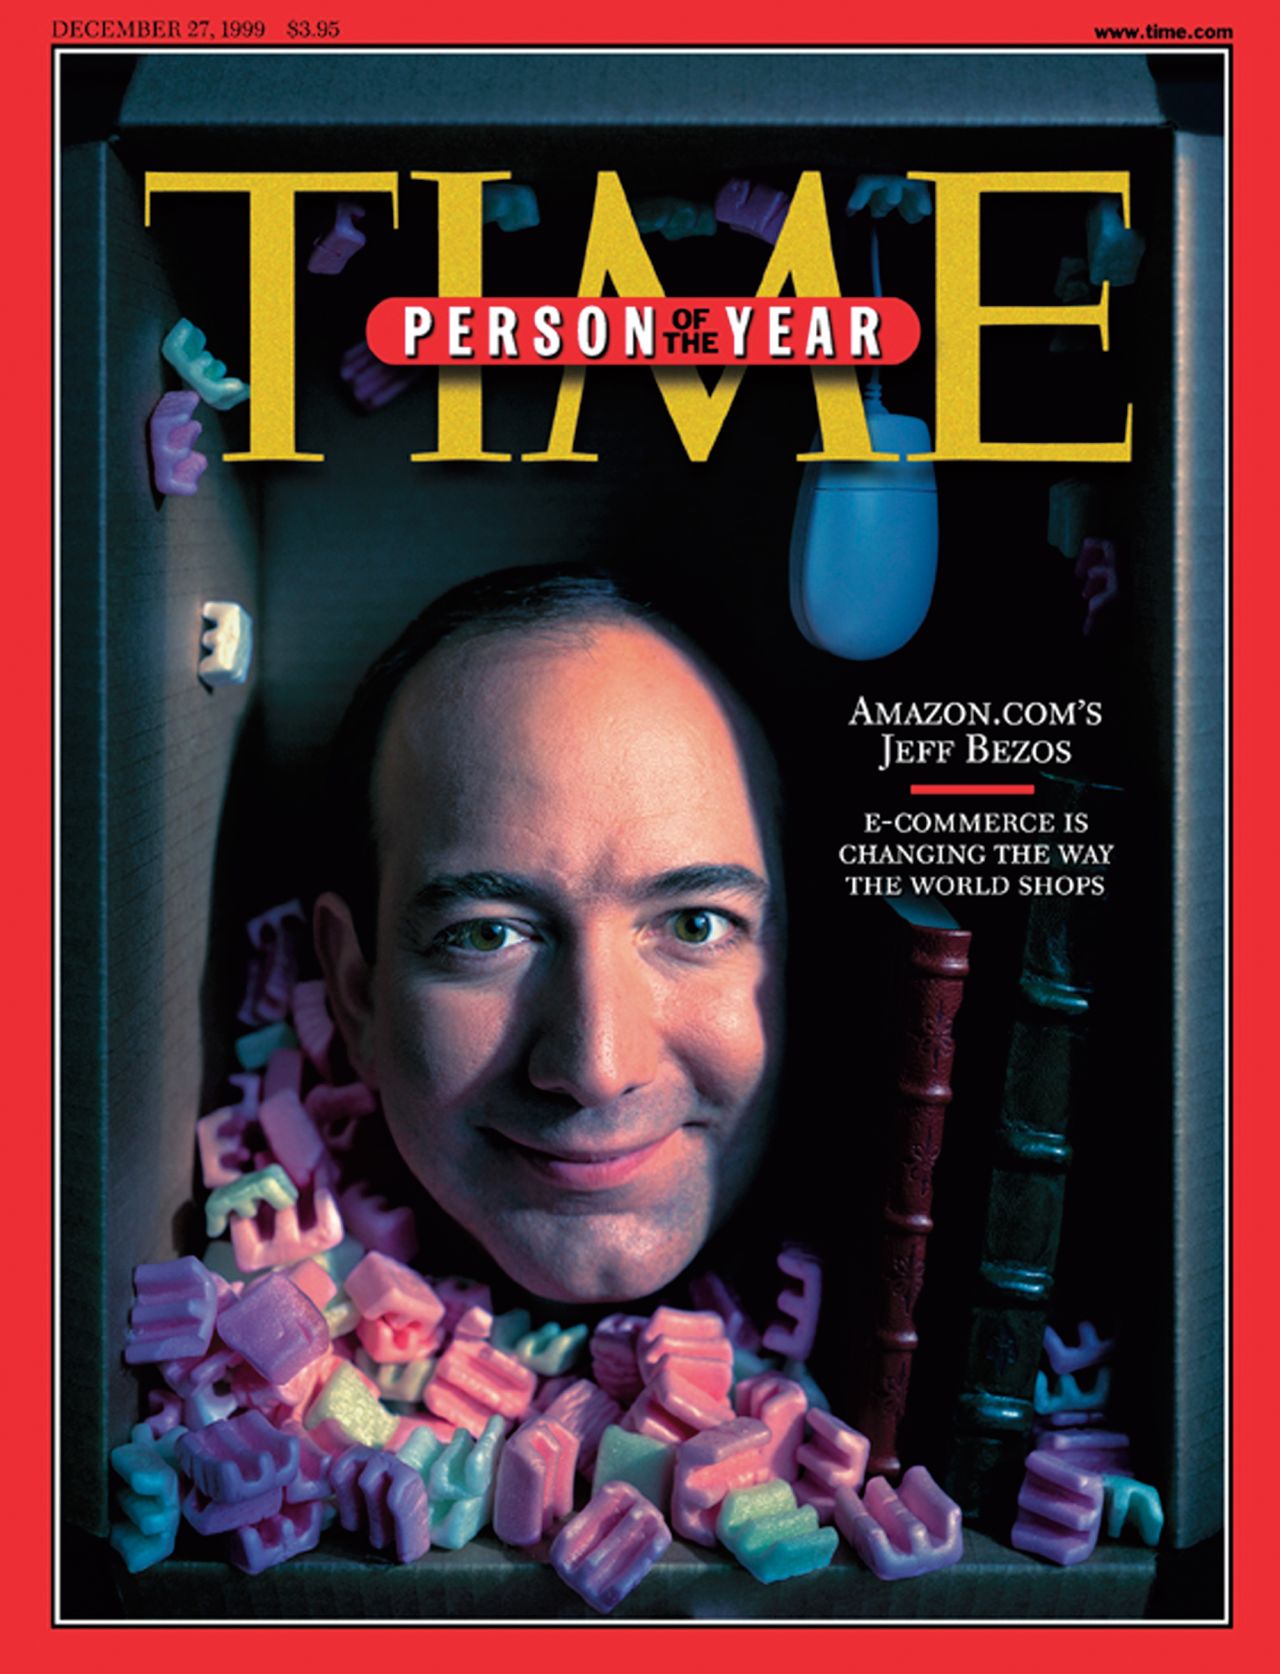 In 1999, Bezos was named Time magazine's Person of the Year.